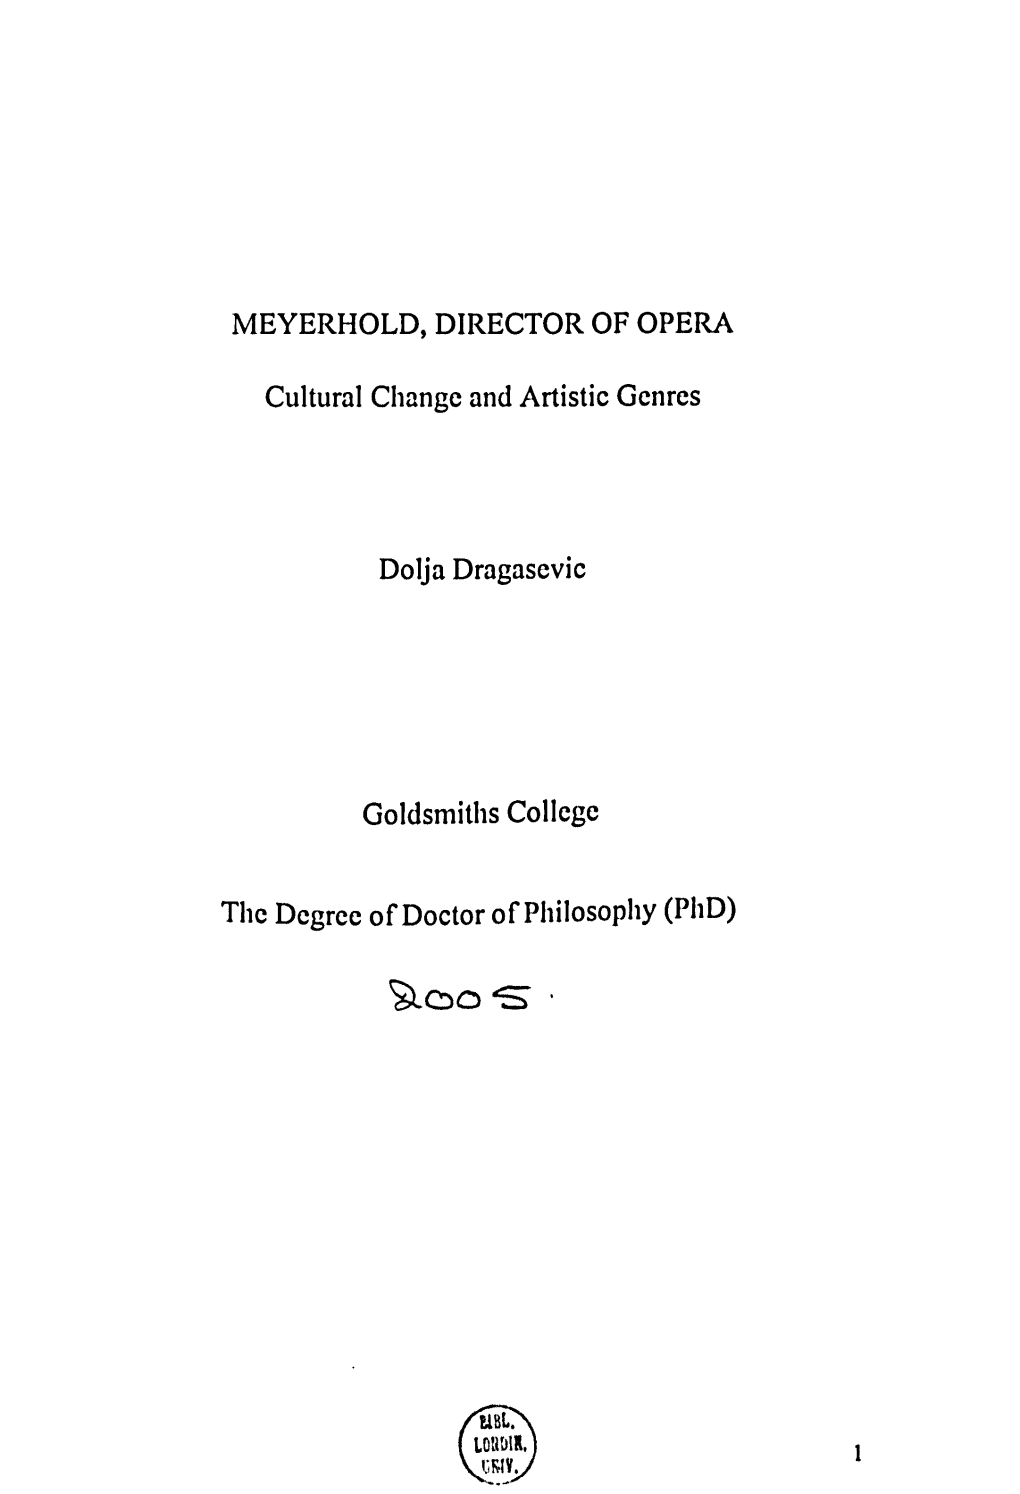 MEYERHOLD, DIRECTOR of OPERA Cultural Change And